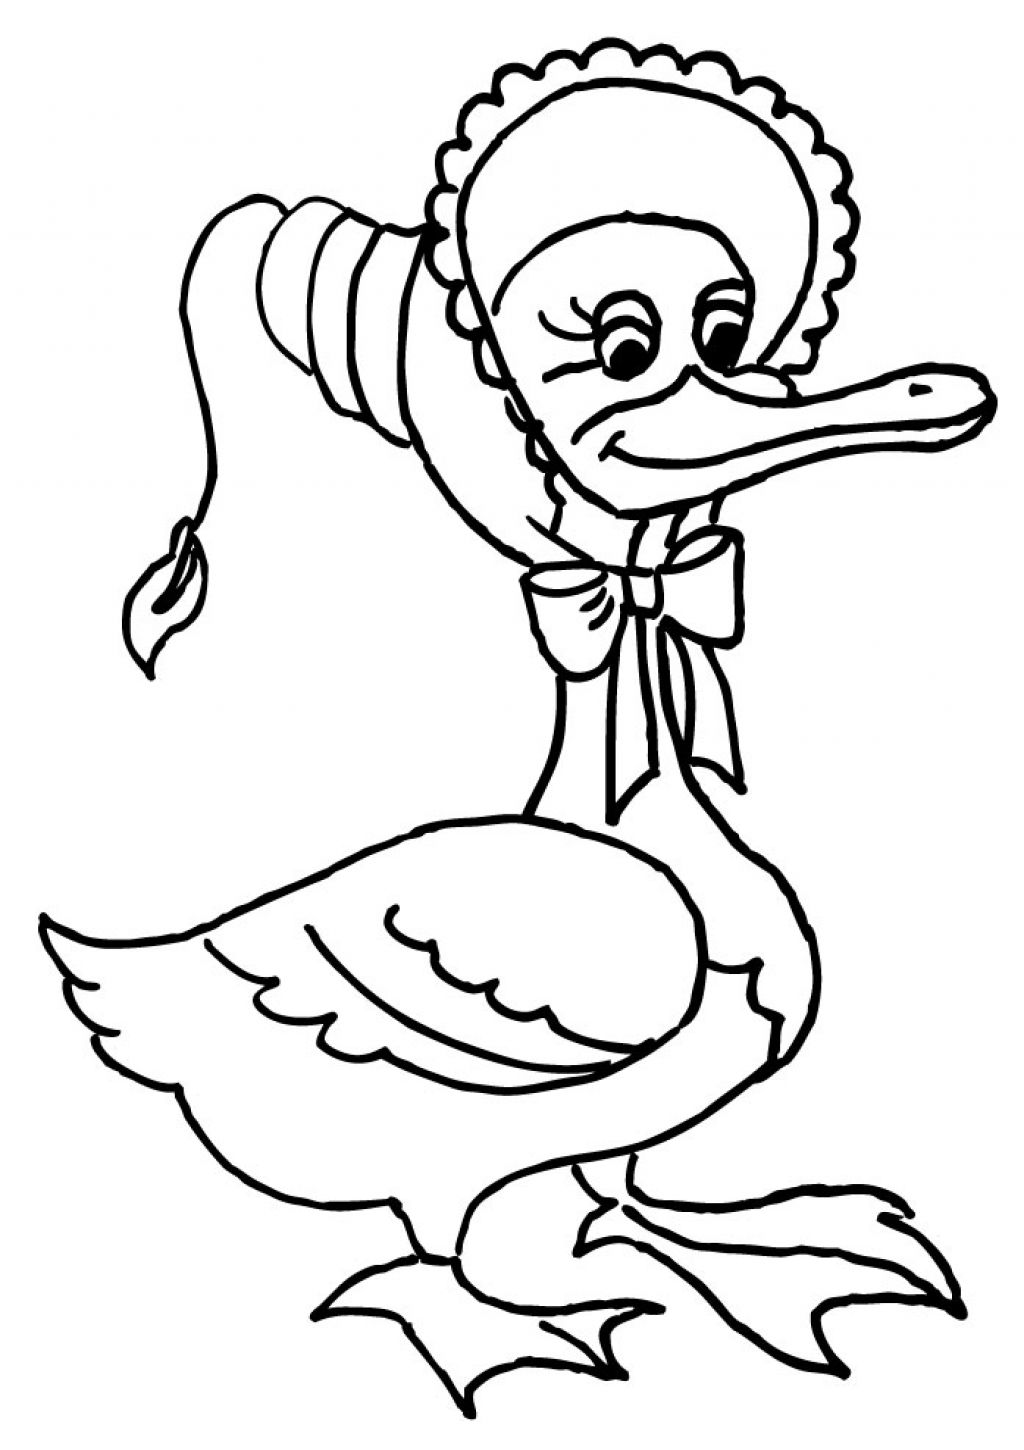 clip art of mother goose - photo #37